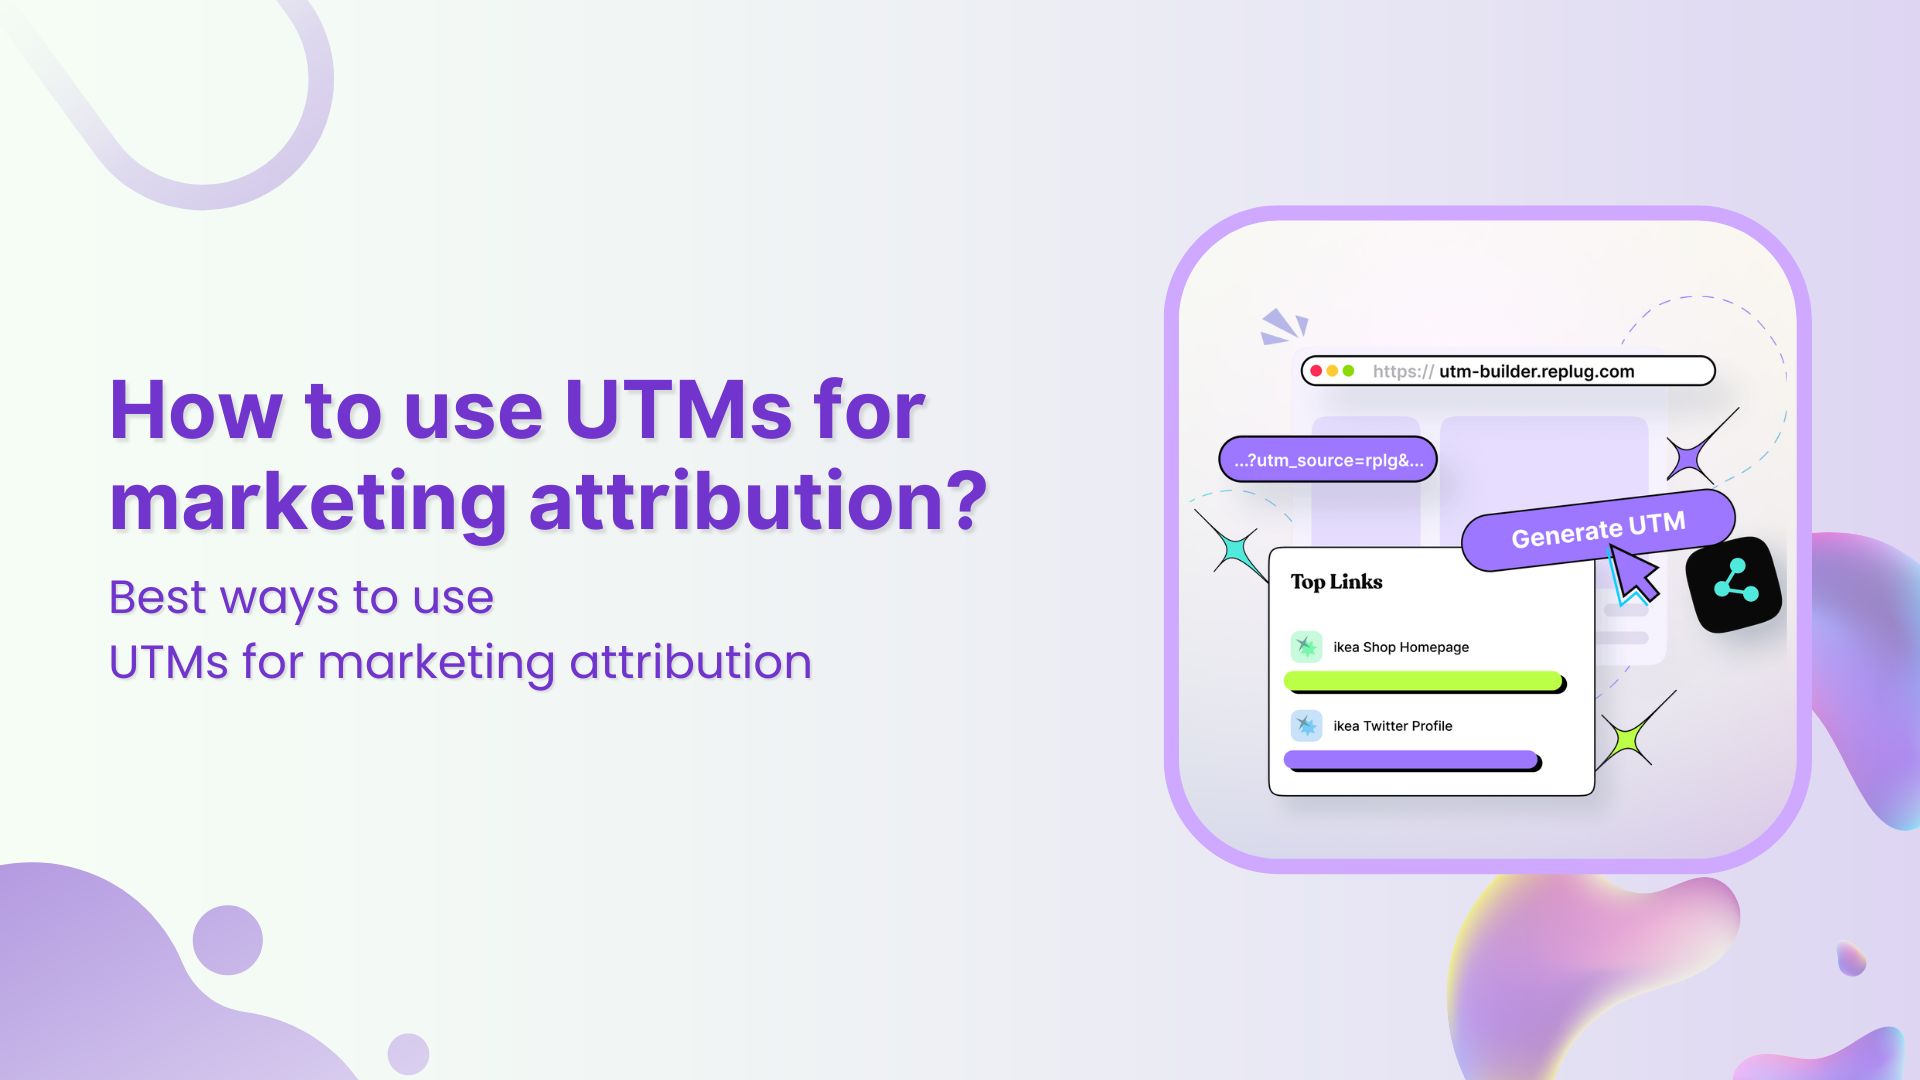 How to use UTMs for marketing attribution?